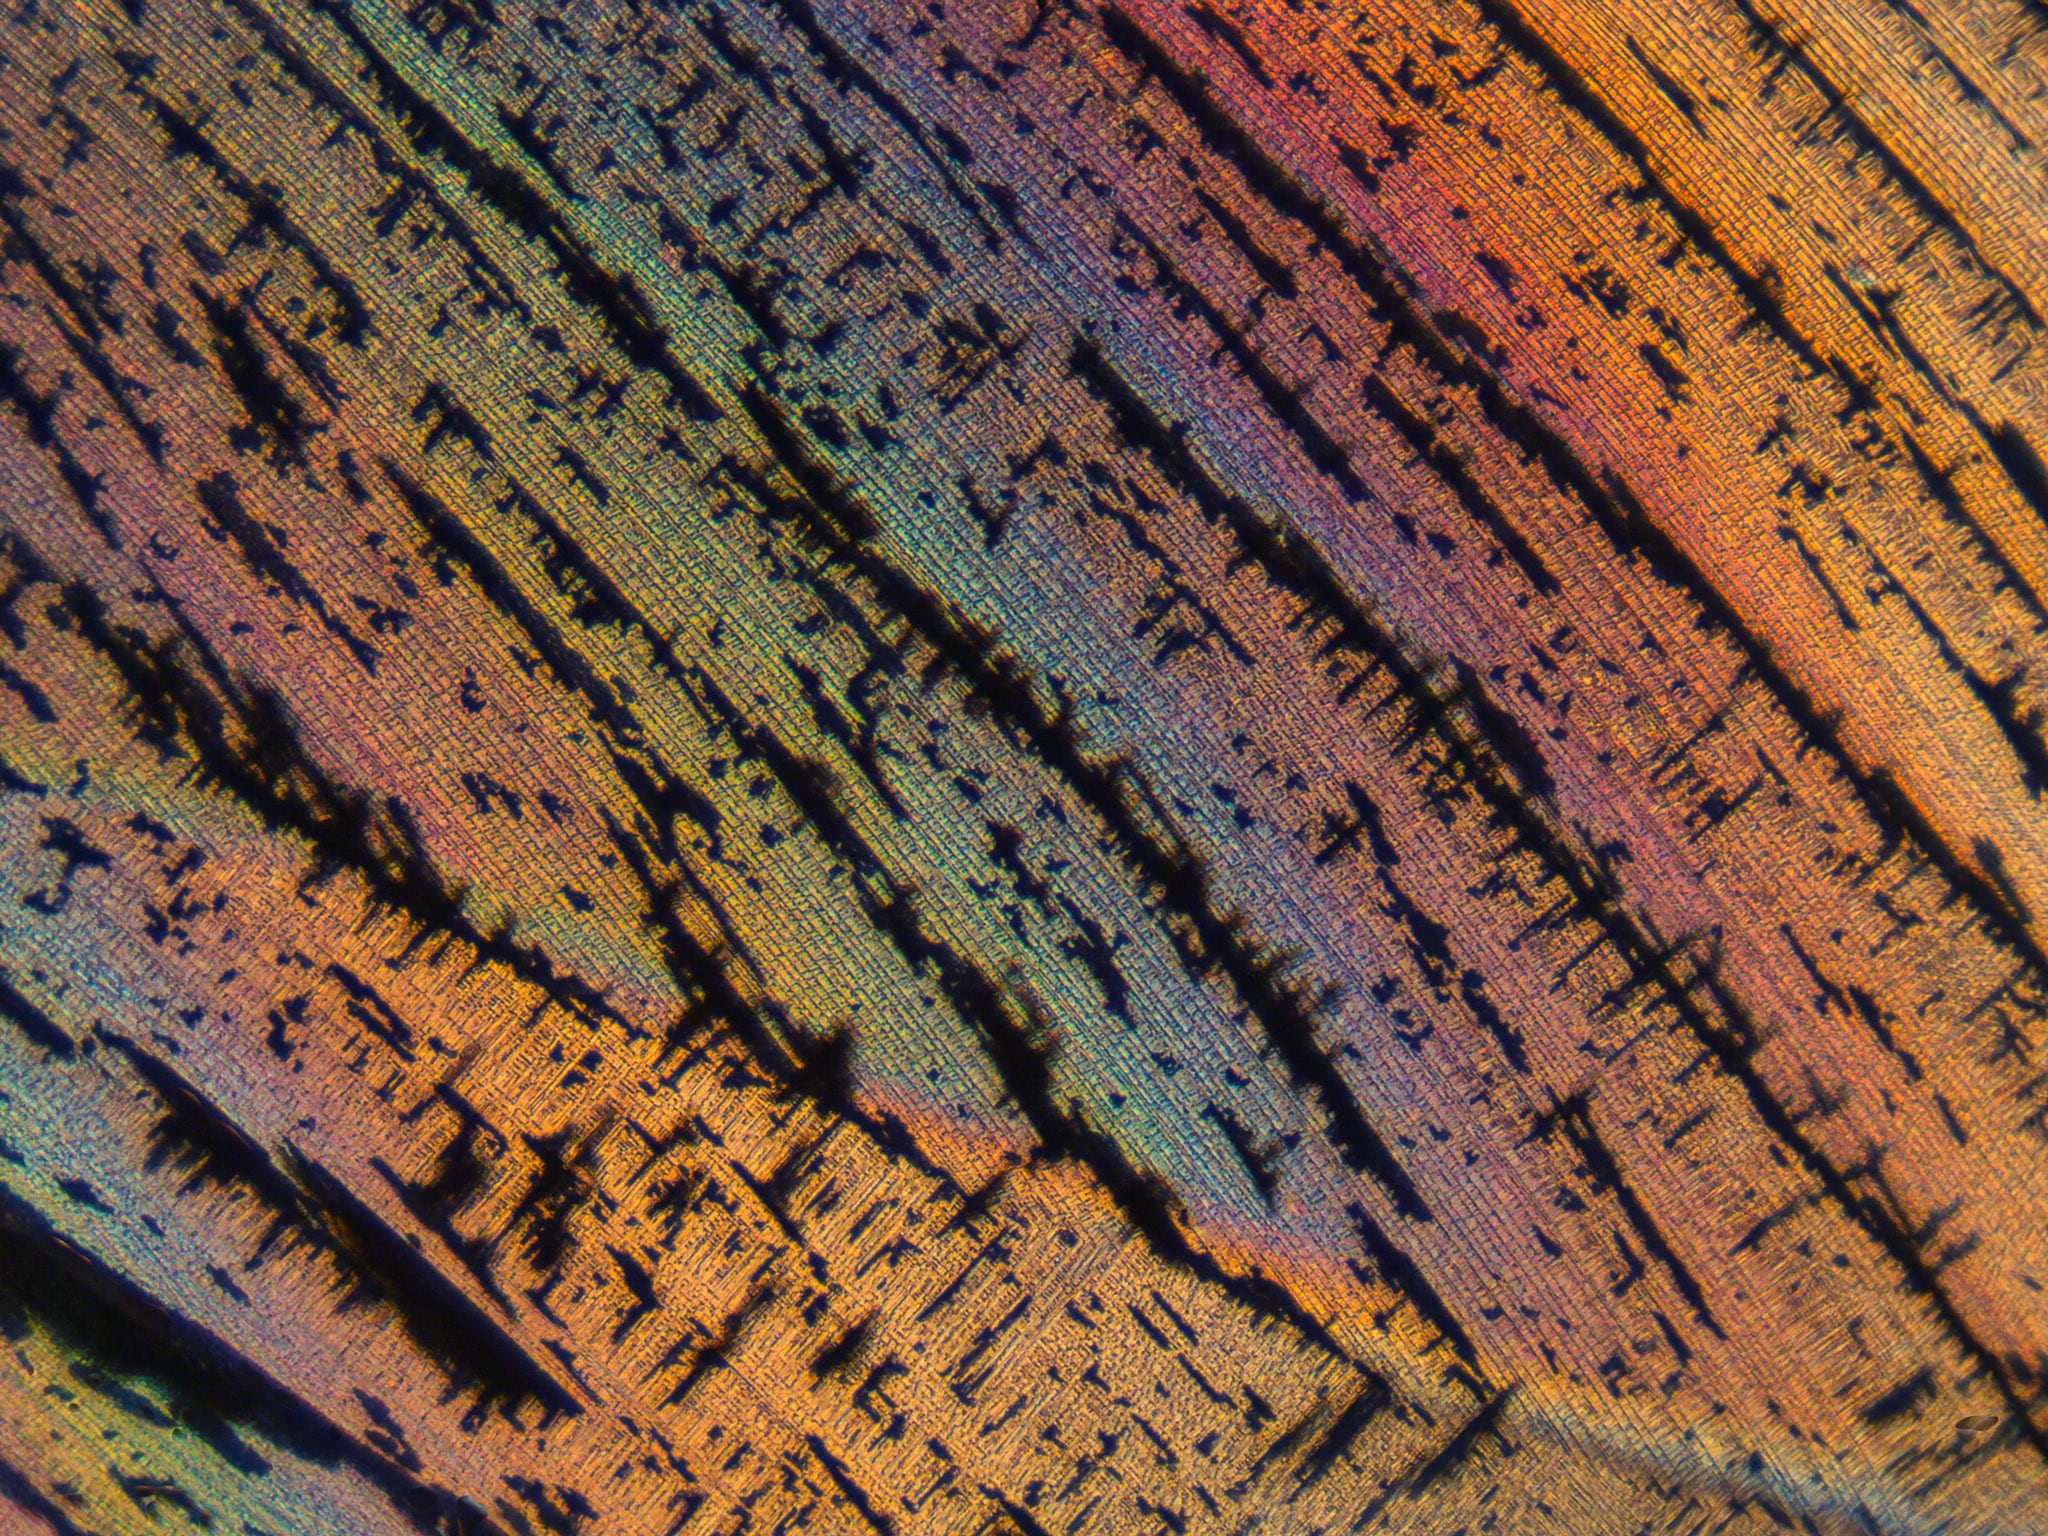 Microscopic crystals of urea and Epson salt at 10X.